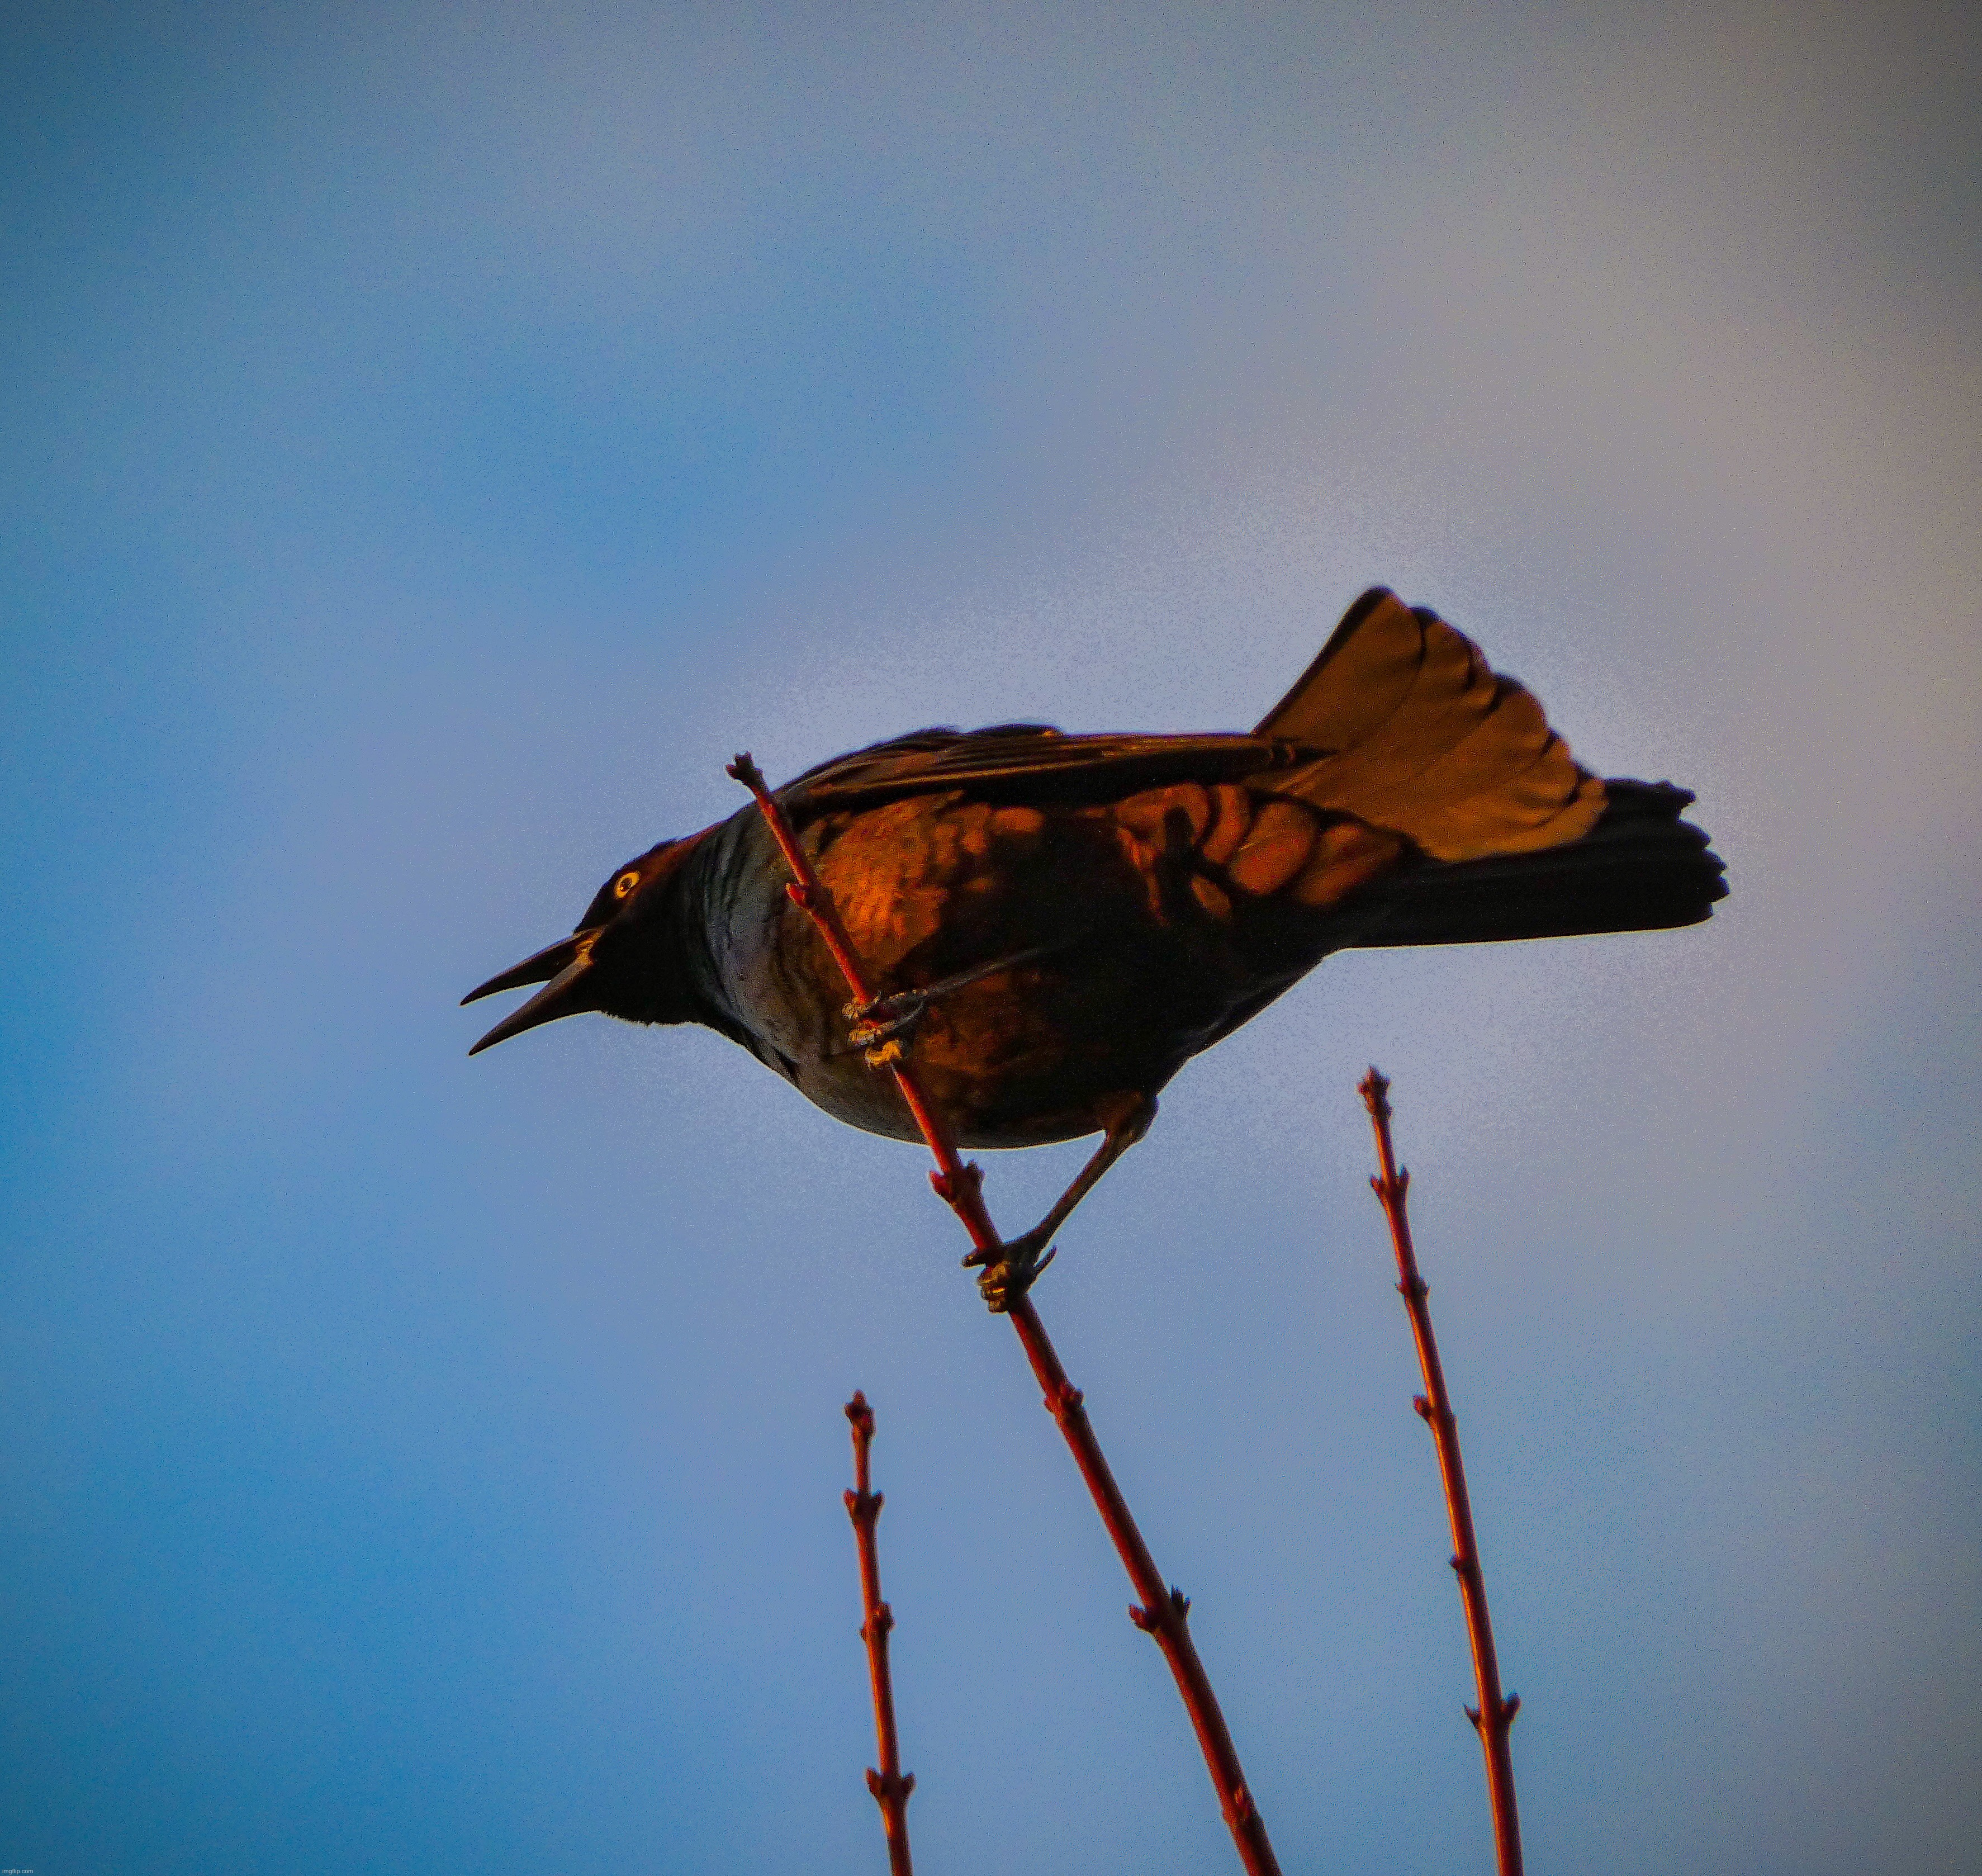 A picture of a grackle high up in a tree that I today | image tagged in share your own photos | made w/ Imgflip meme maker